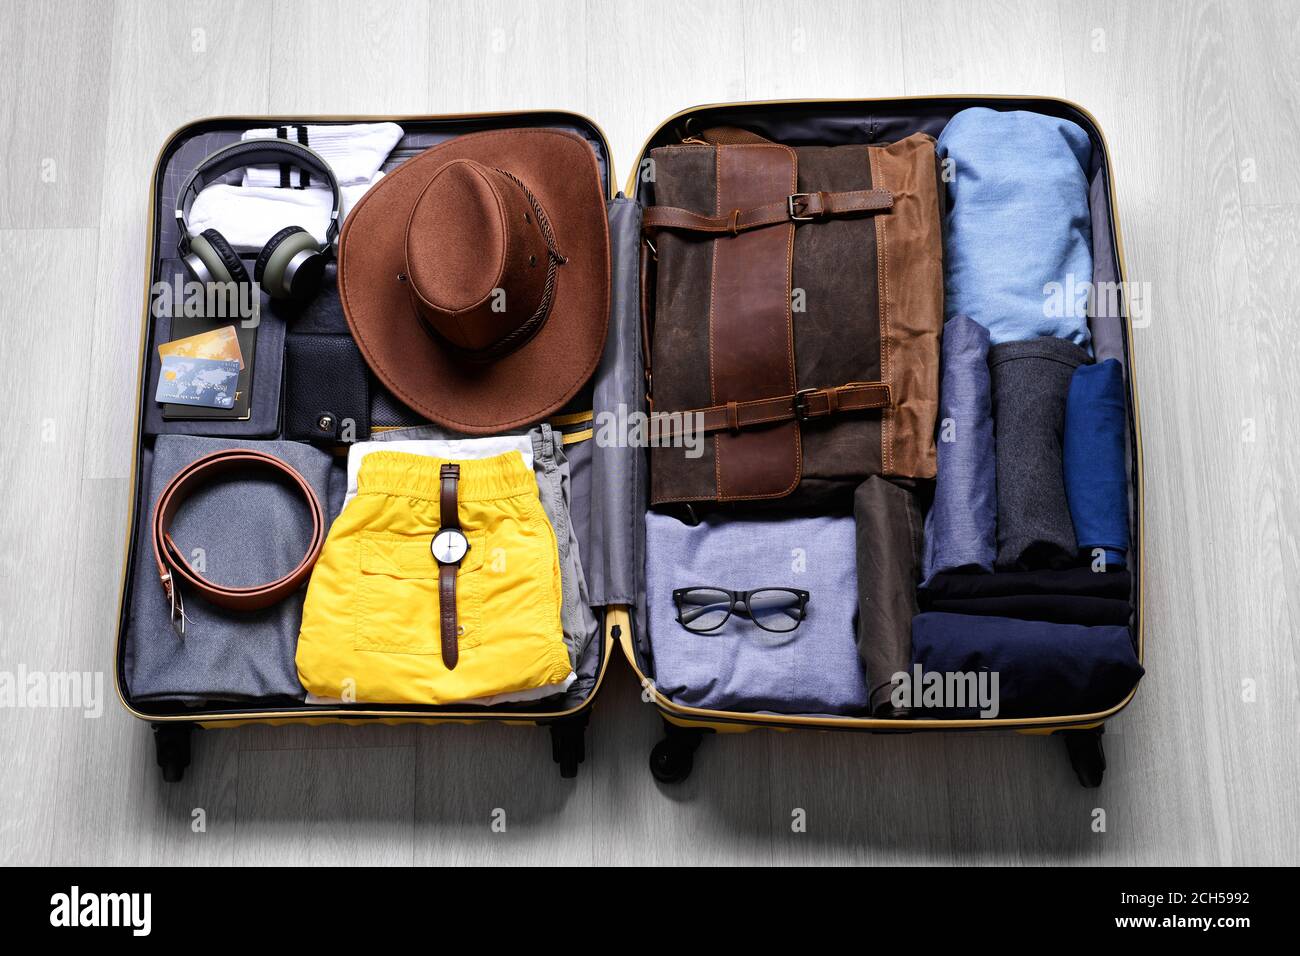 https://c8.alamy.com/comp/2CH5992/open-packed-suitcase-on-wooden-background-travel-concept-2CH5992.jpg